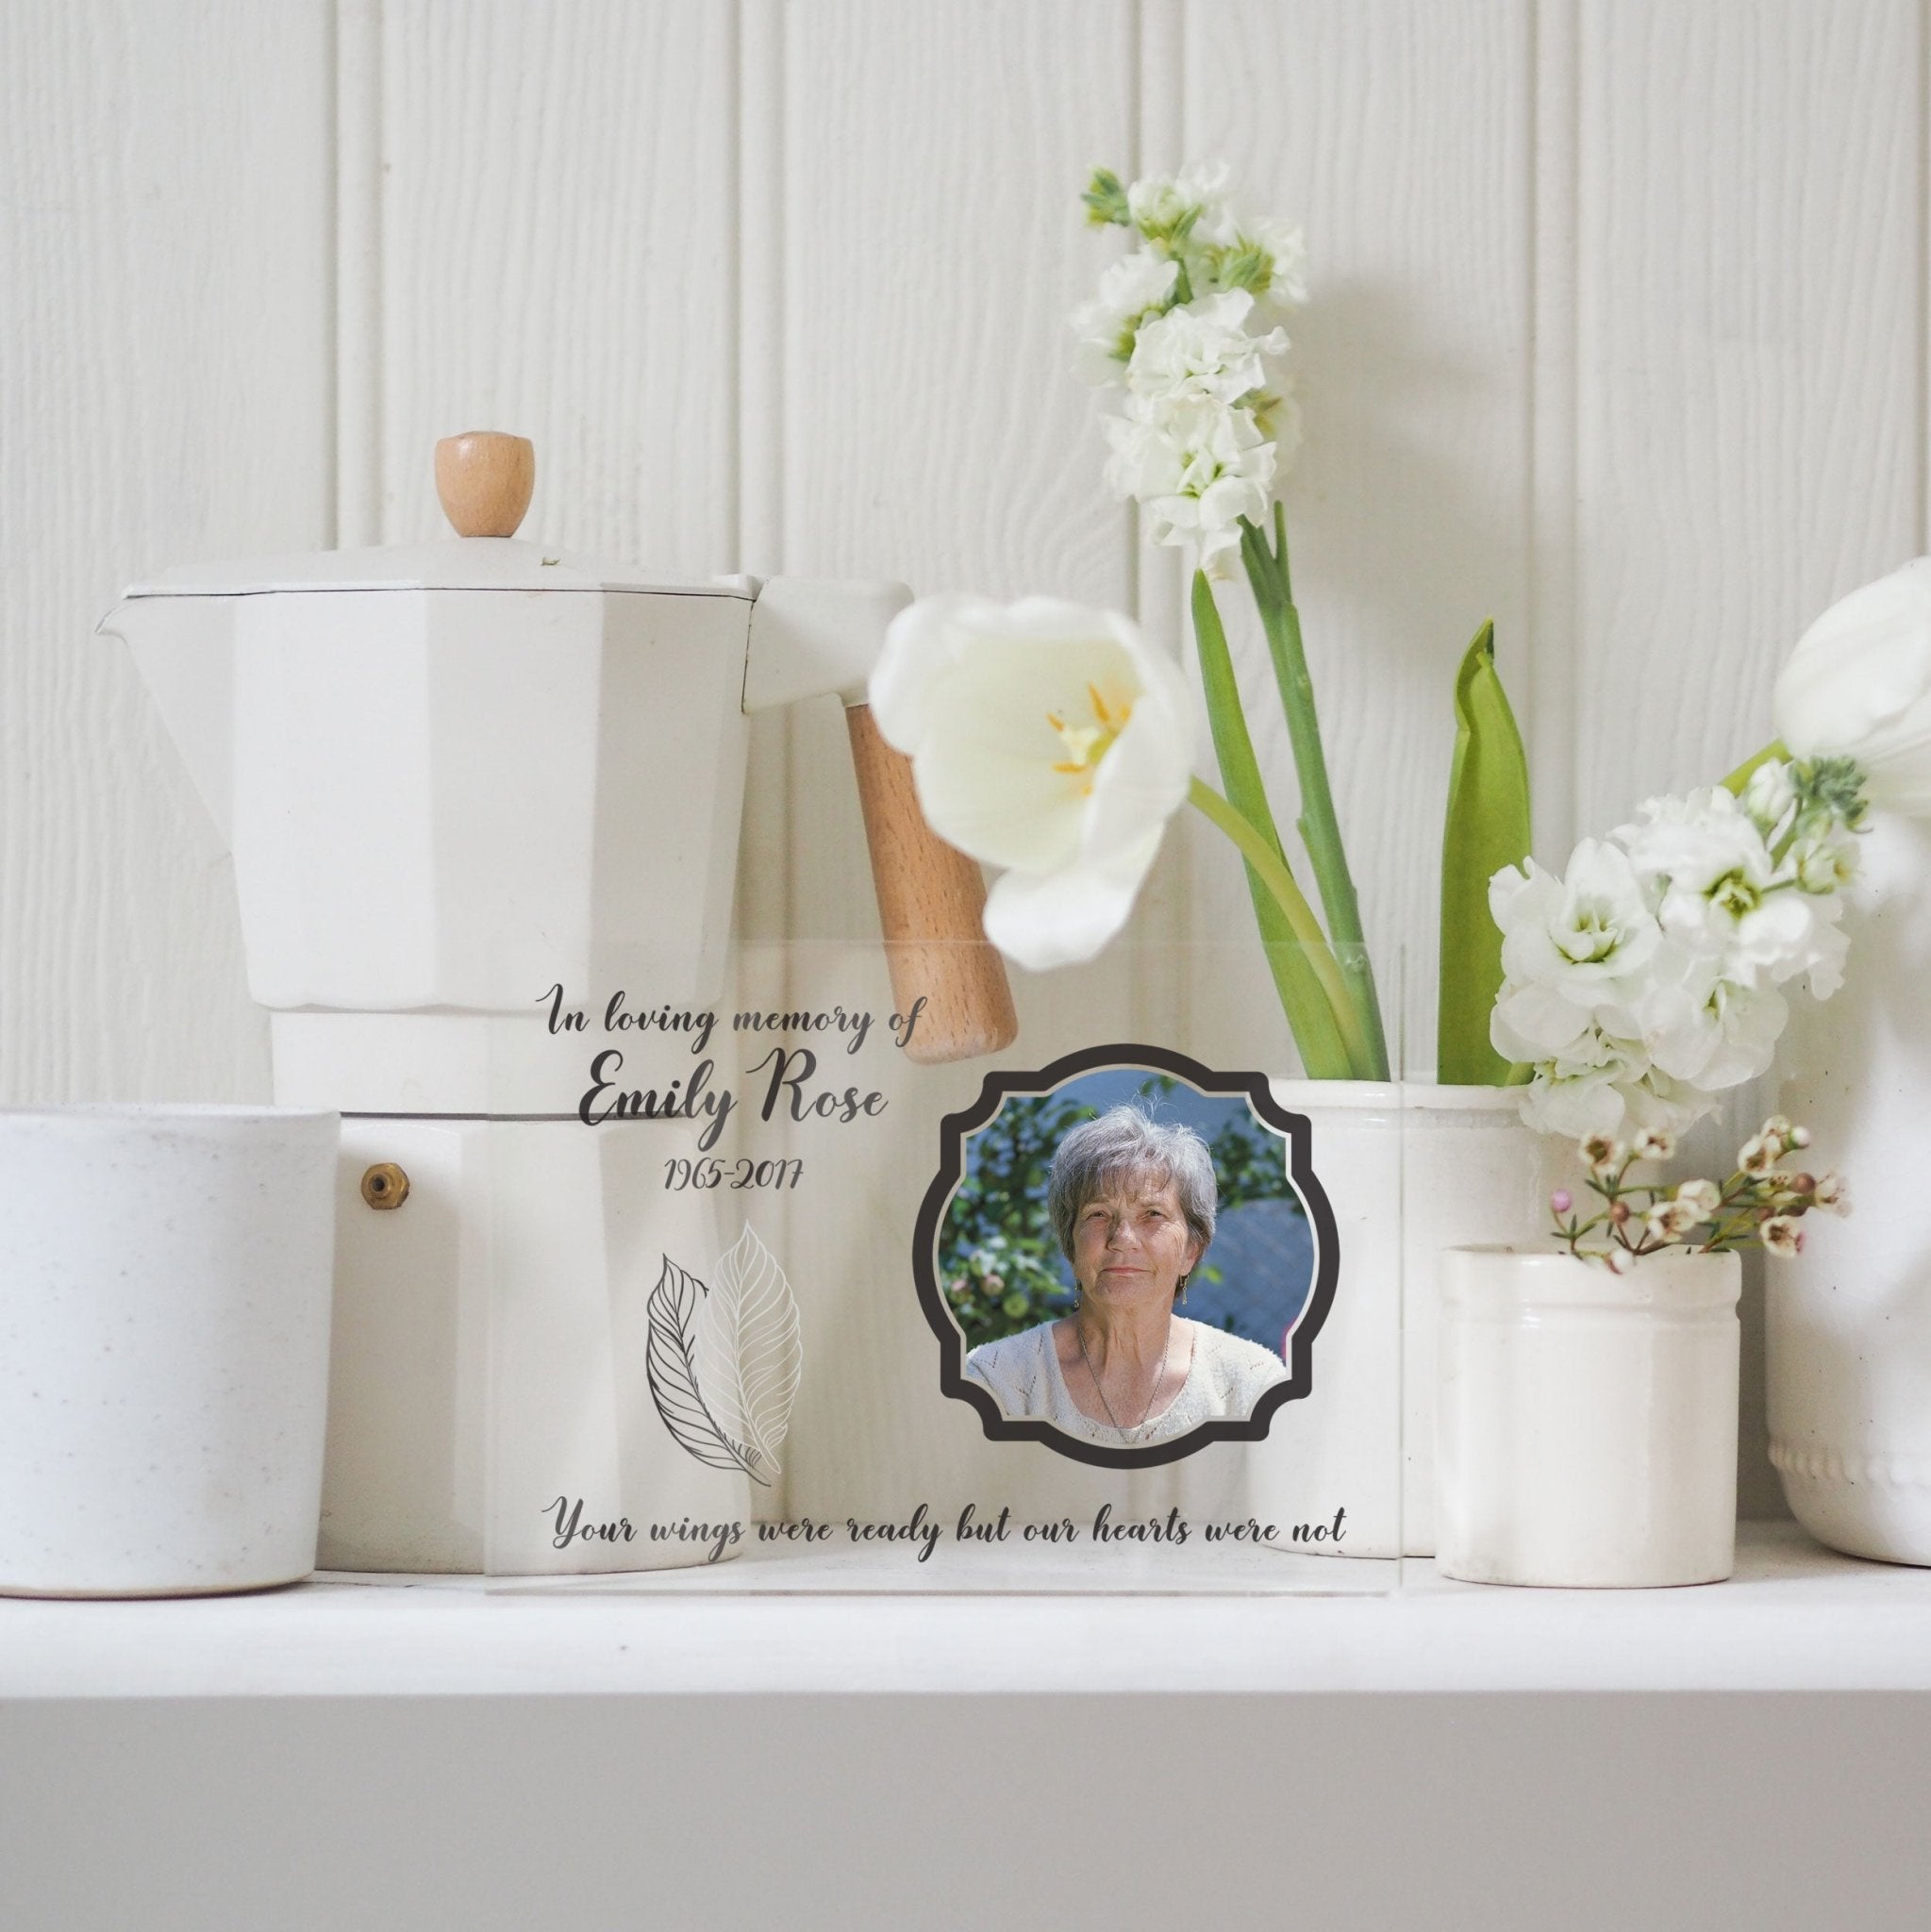 Sympathy Gift Mother, Condolence Gift, Loss of Mother PhotoBlock - Unique Prints